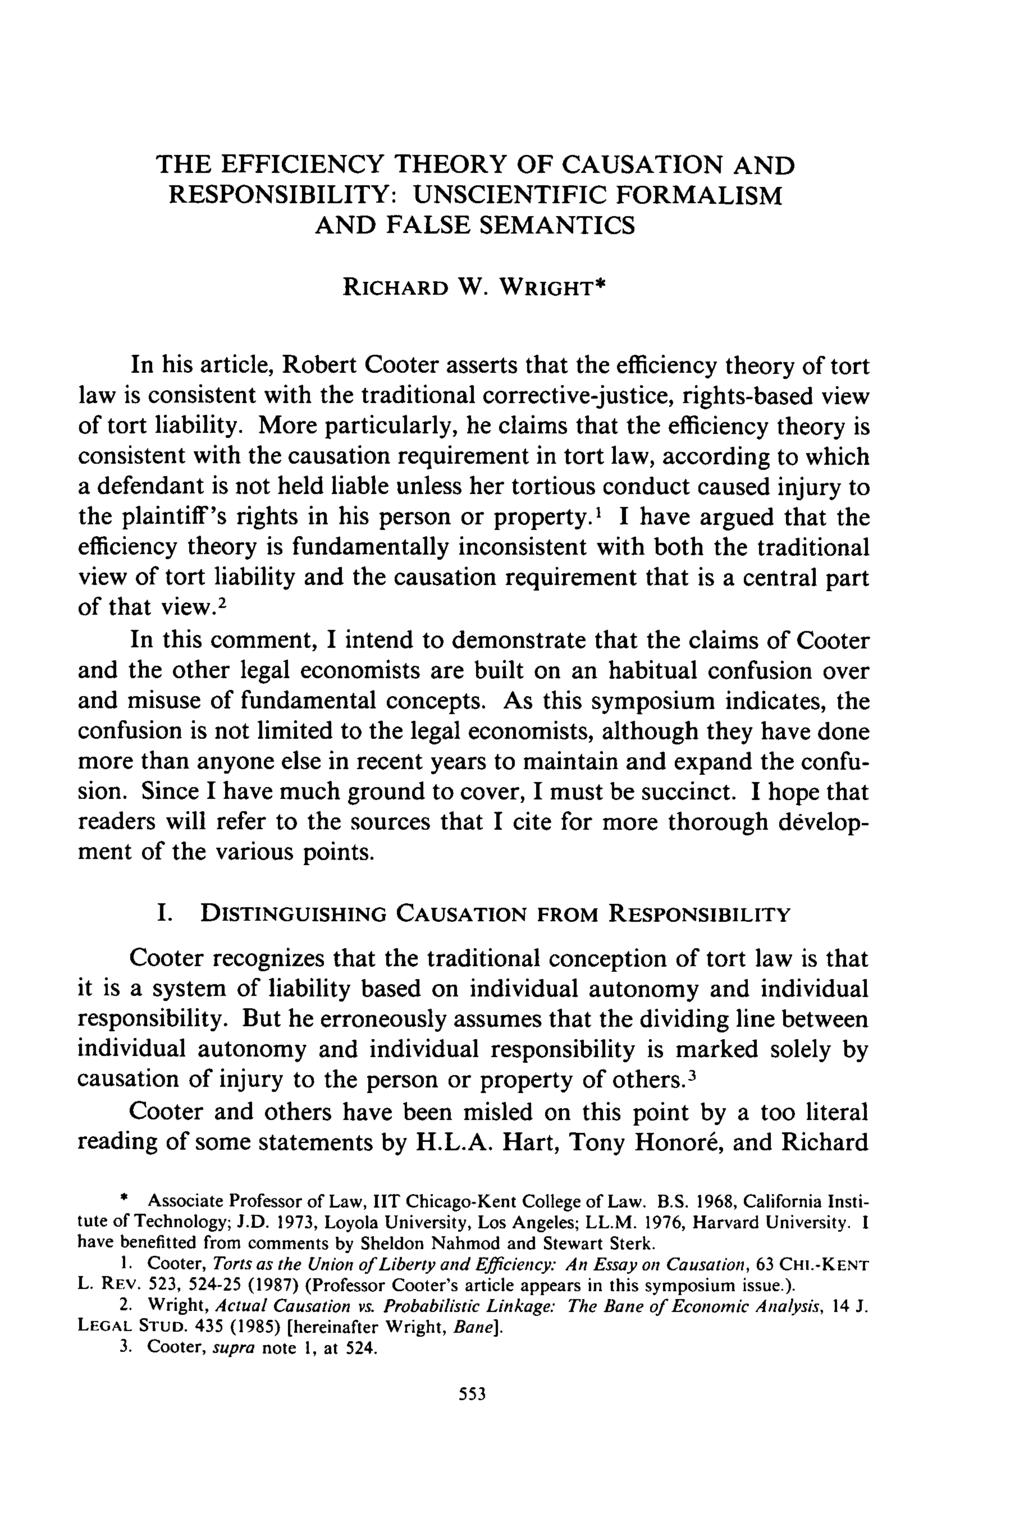 THE EFFICIENCY THEORY OF CAUSATION AND RESPONSIBILITY: UNSCIENTIFIC FORMALISM AND FALSE SEMANTICS RICHARD W.